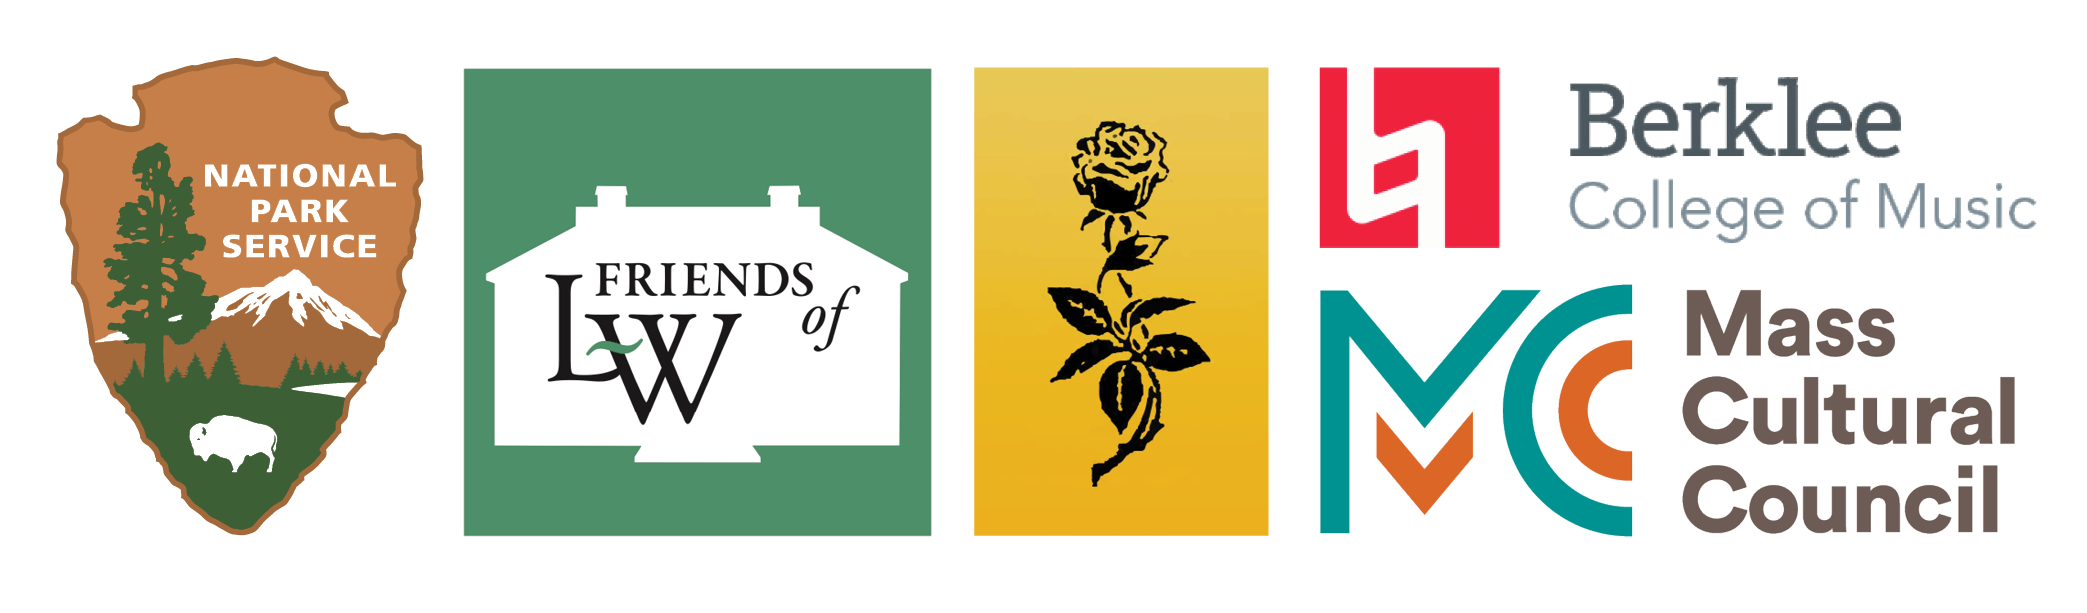 National Park Service, Friends of the Longfellow House, New England Poetry Club, Berklee, and Mass Cultural Council logos